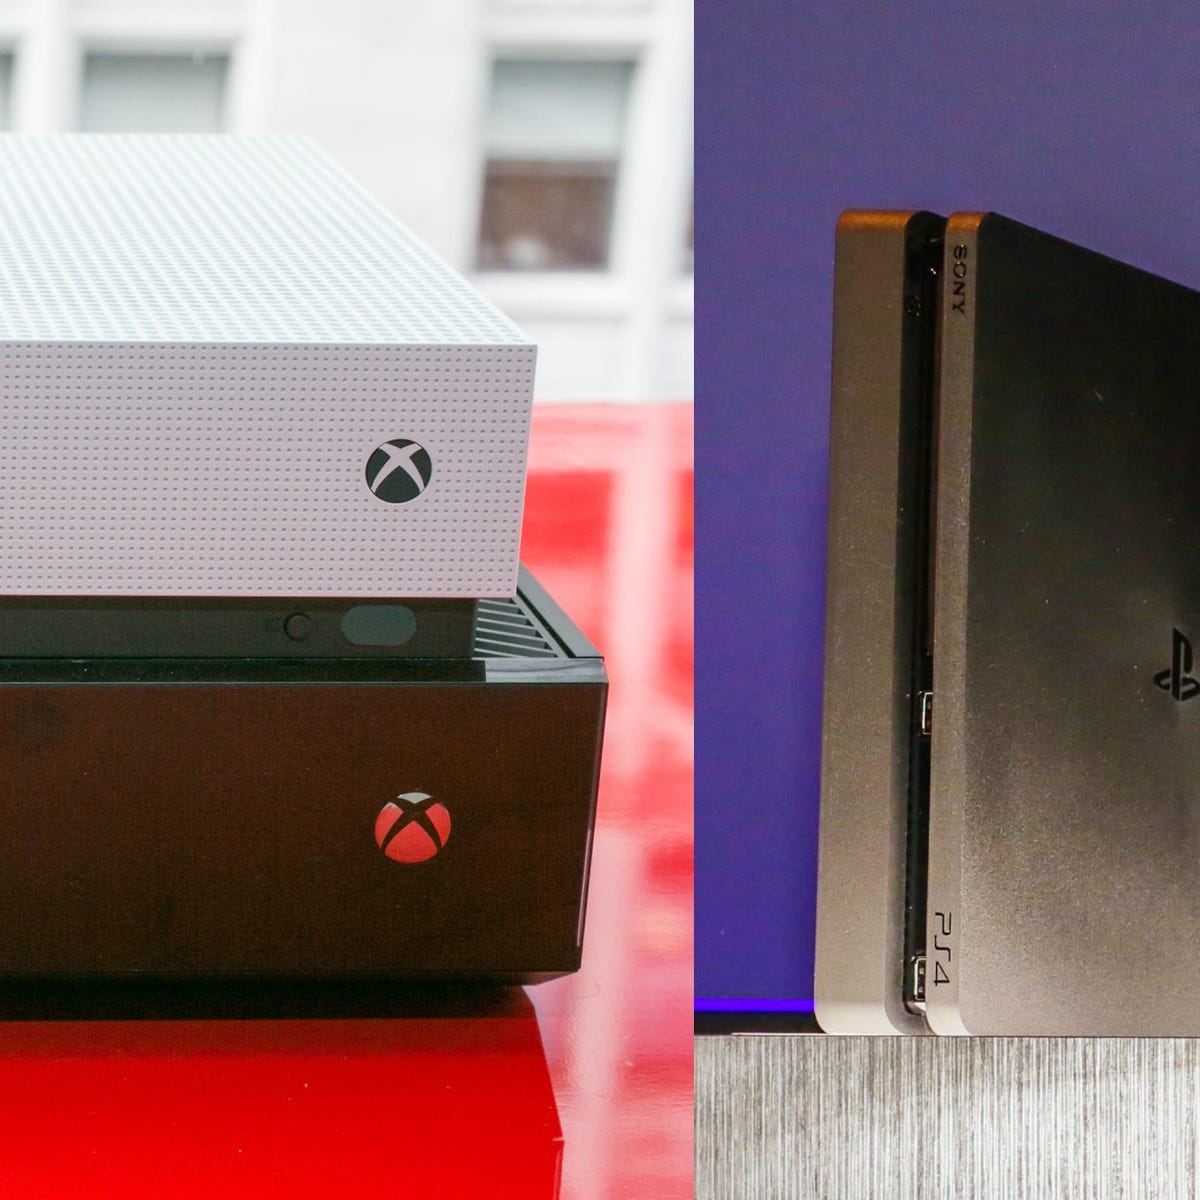 PS4 Slim vs. PS4 Pro vs. Xbox One vs. Xbox One S: Size, weight, specs, and  more - CNET